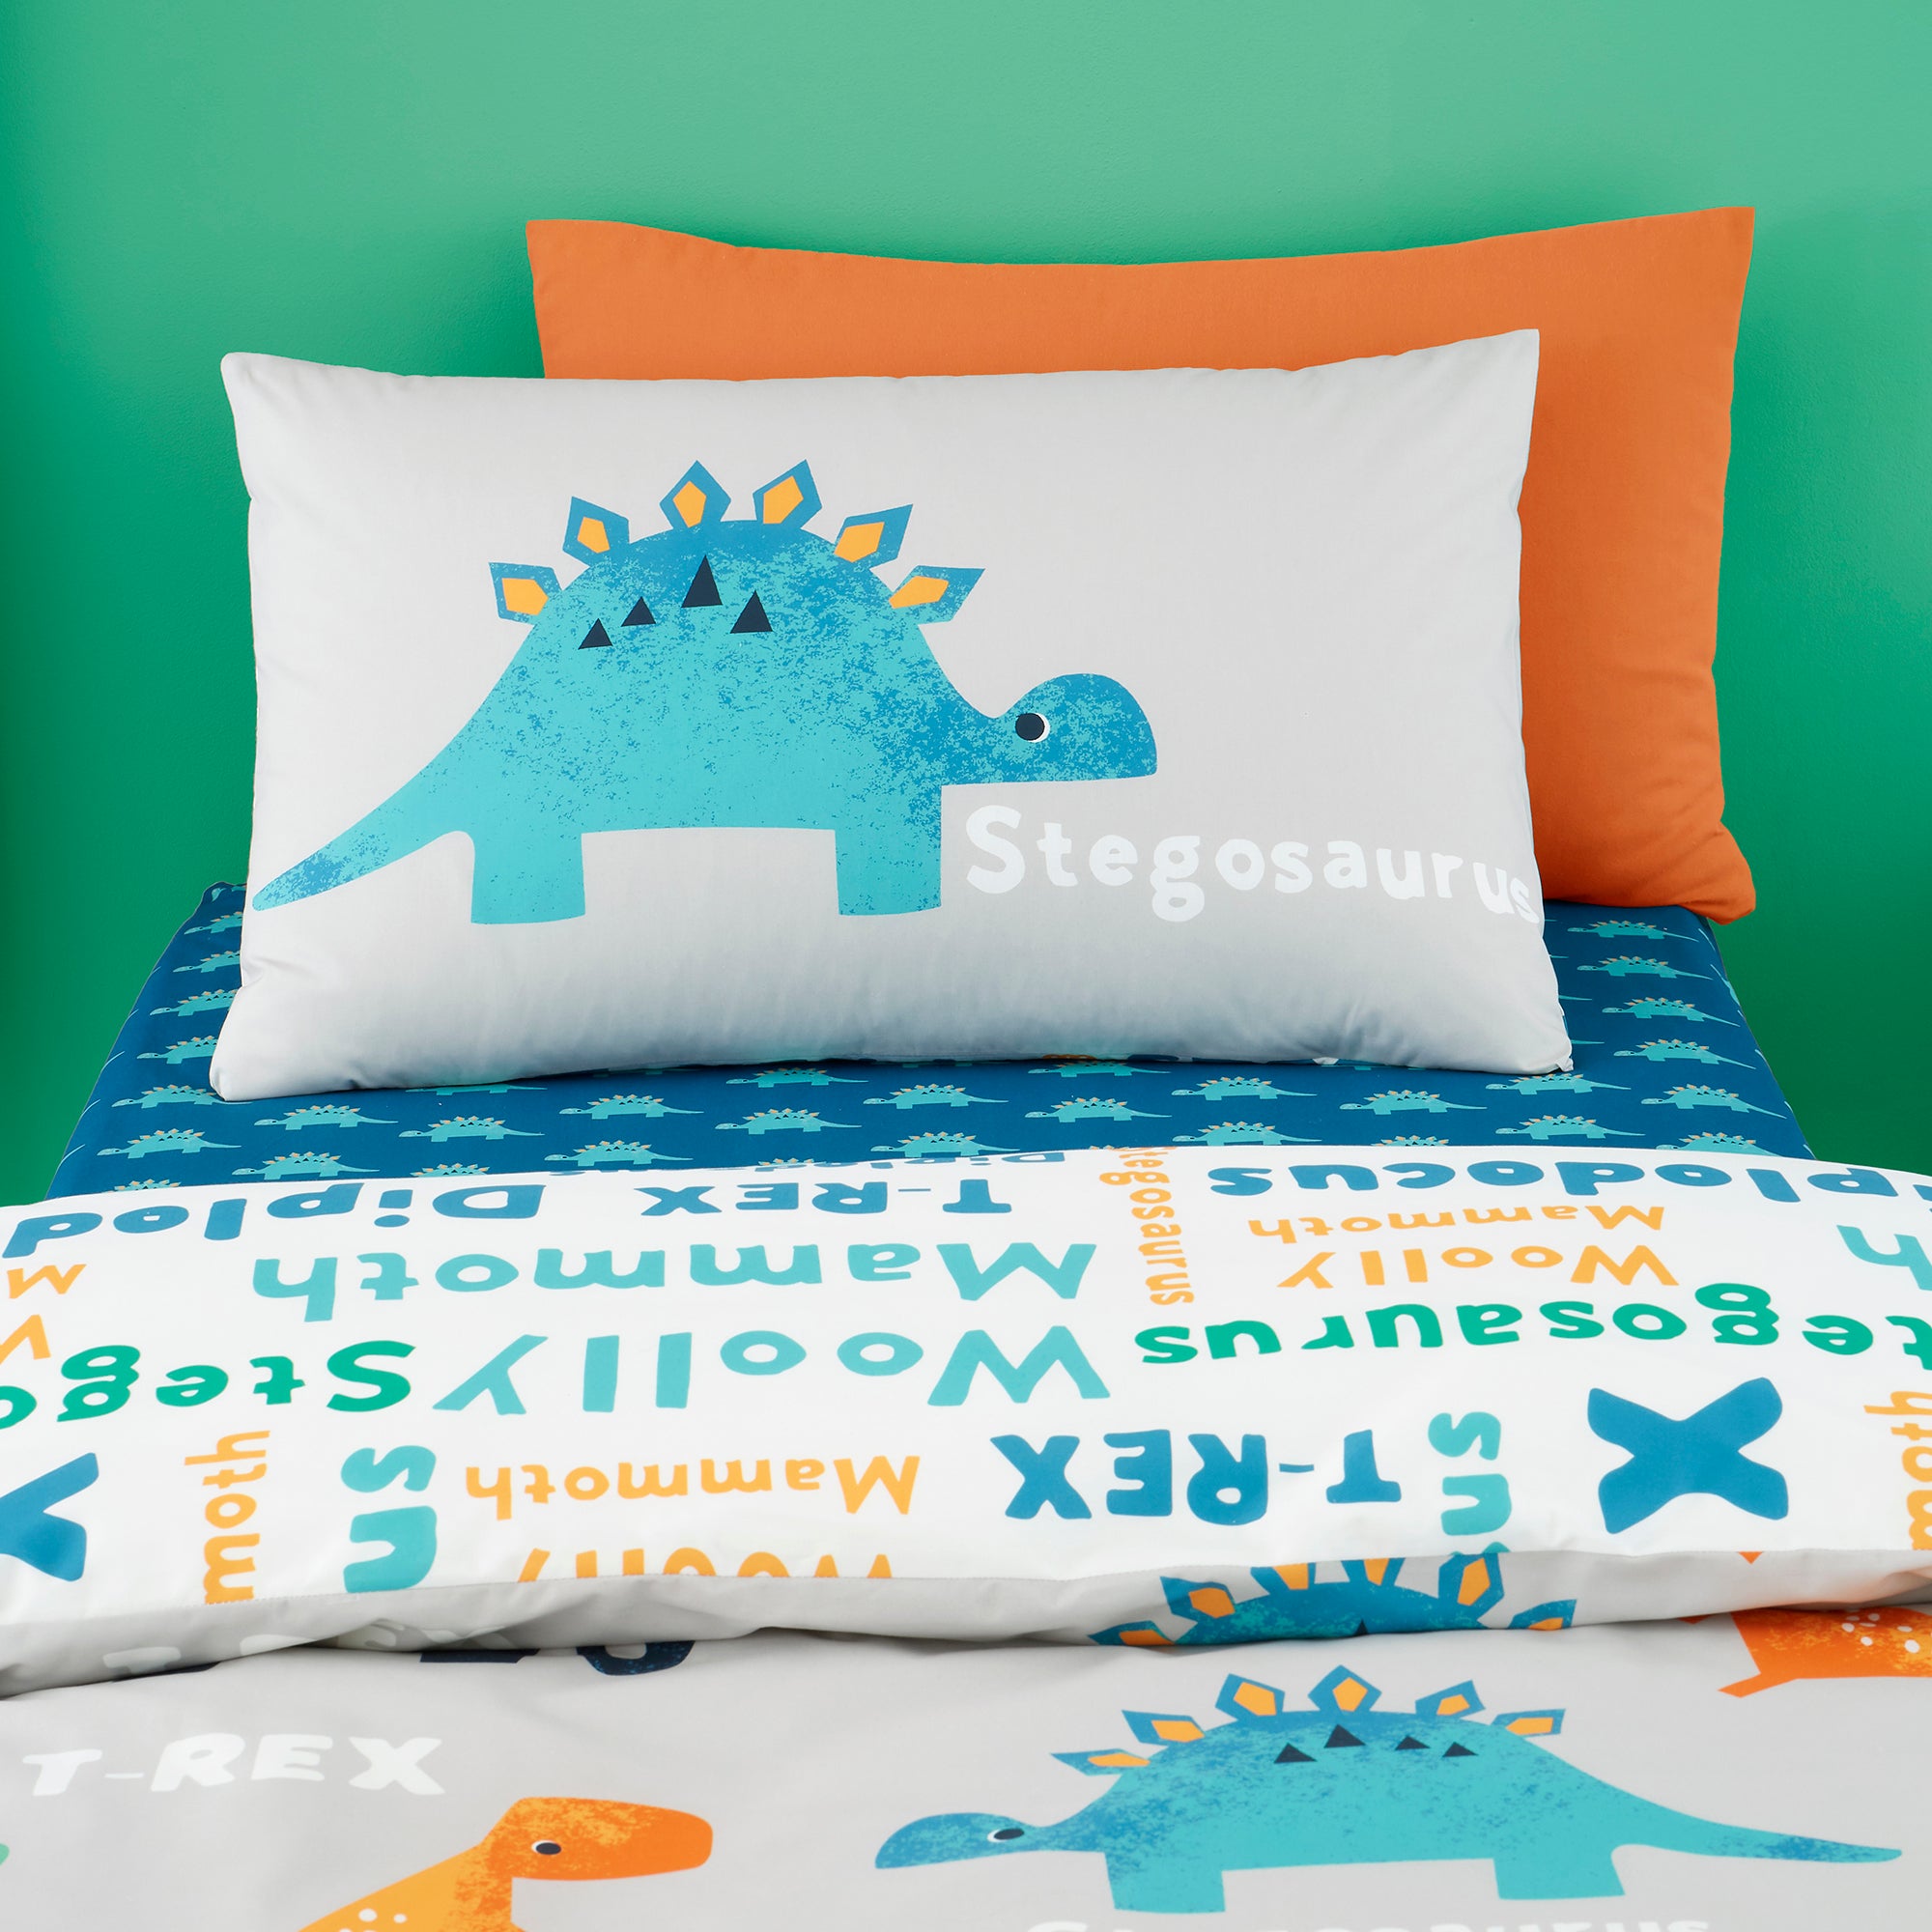 D Is For Dino - Childrens Duvet Cover Set & Curtains by Cosatto